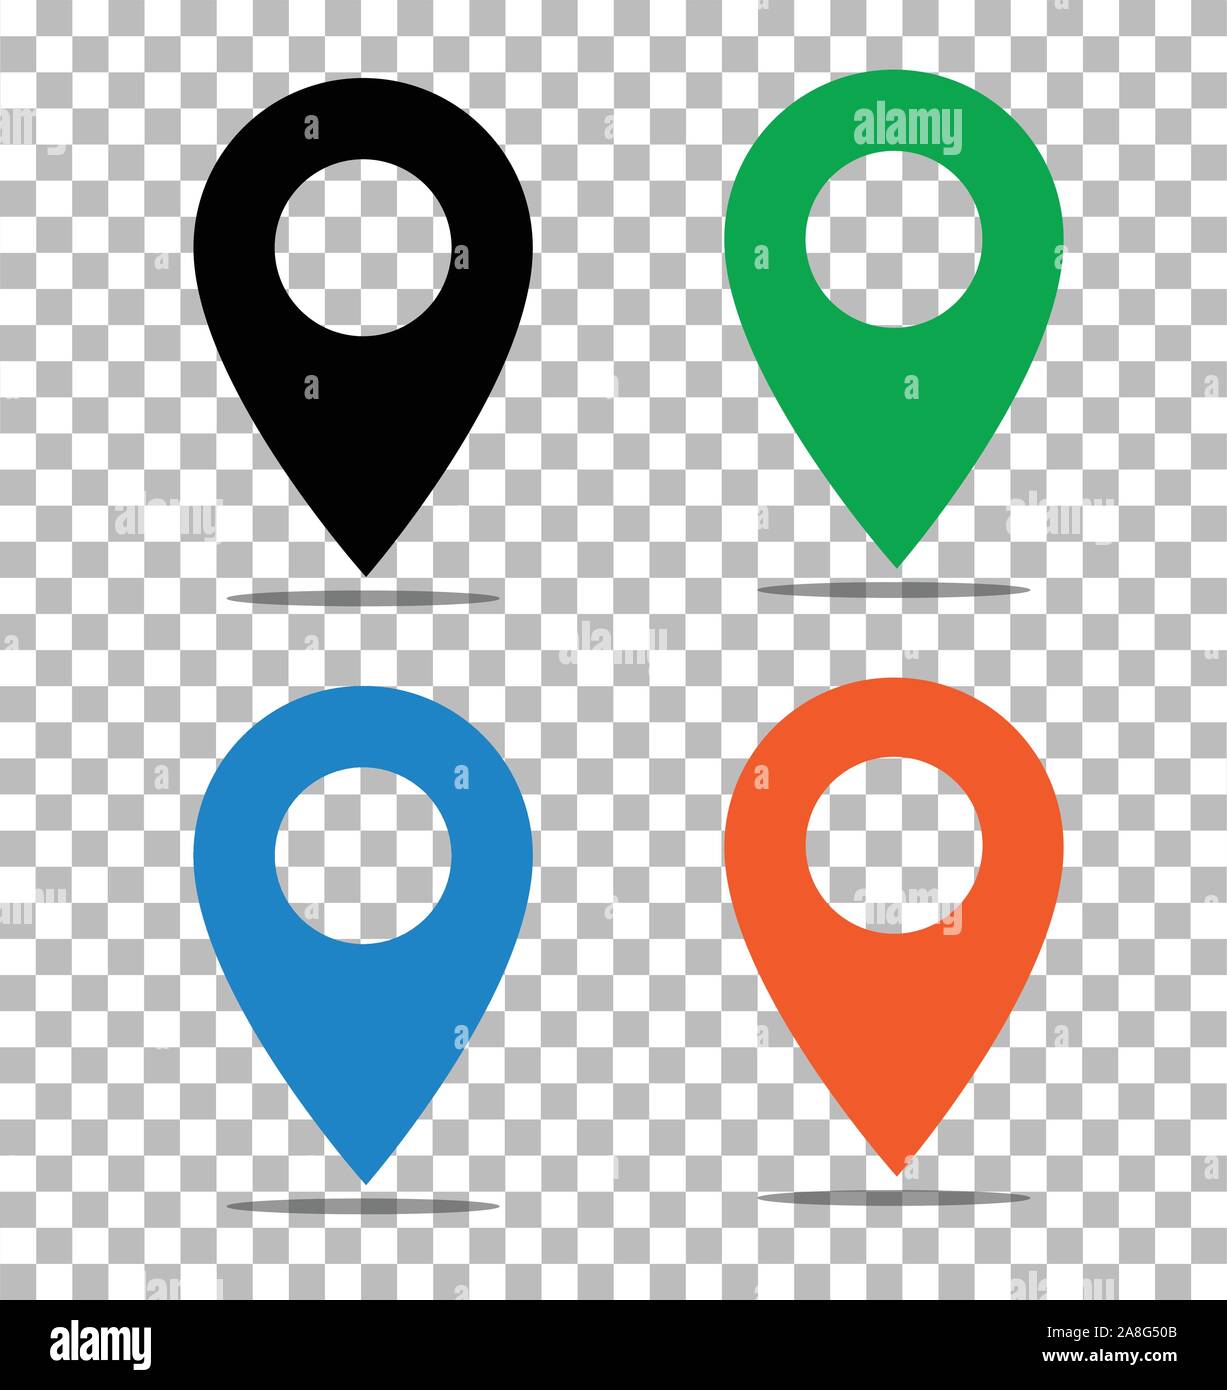 Location Pin Icon On Transparent Pin On The Map Sign Flat Style Black Green Blue And Orange Location Pin Symbol Map Pointer Symbol Map Pin Sign Stock Vector Image Art